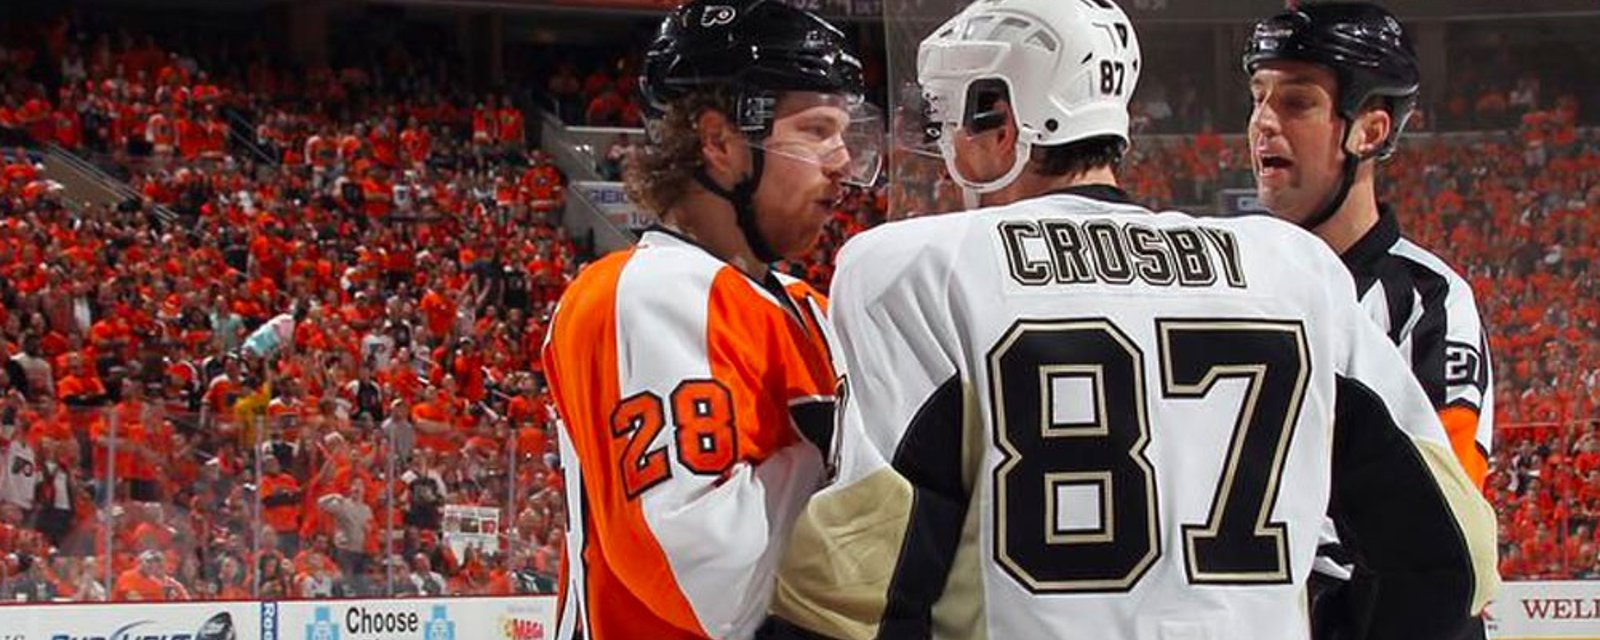 Crosby gets drilled by rival players for his on-ice antics 